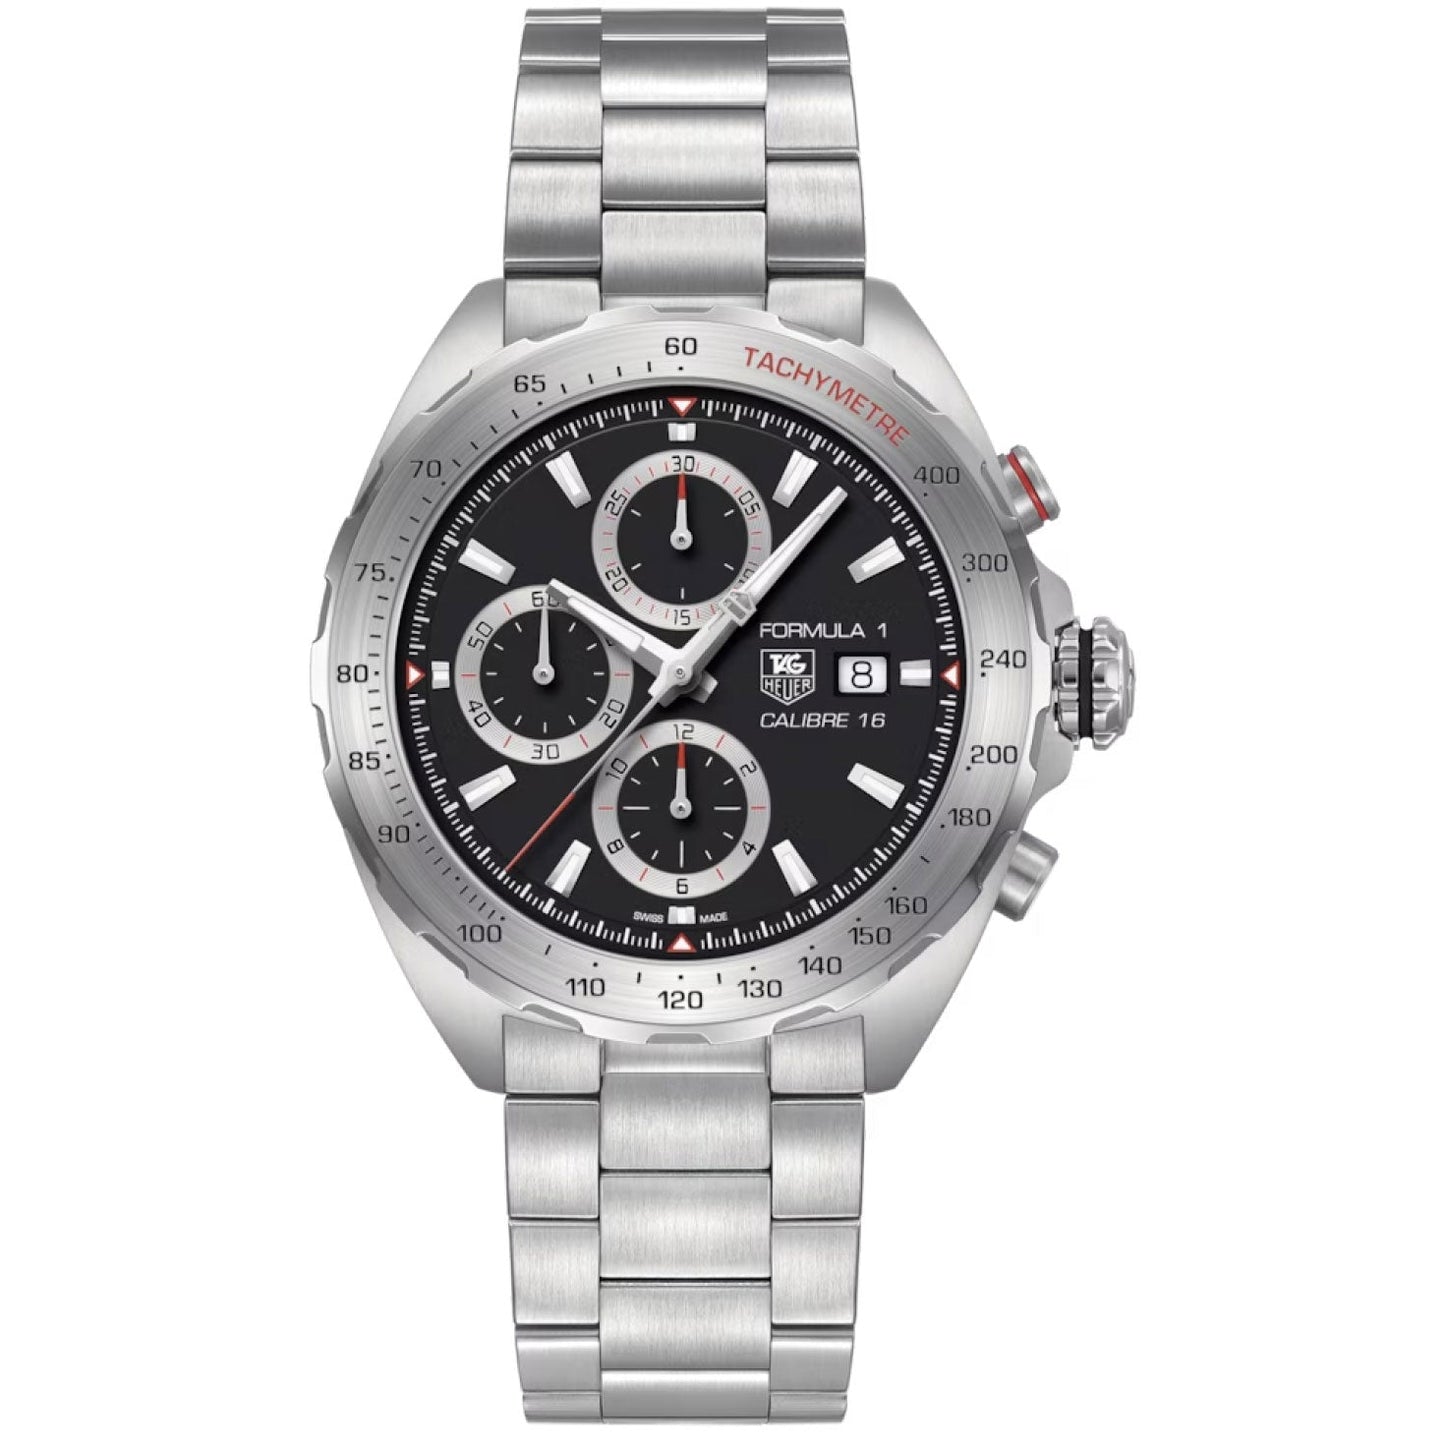 TAG Heuer Formula 1 Calibre 16 Automatic Chronograph 44mm Watch